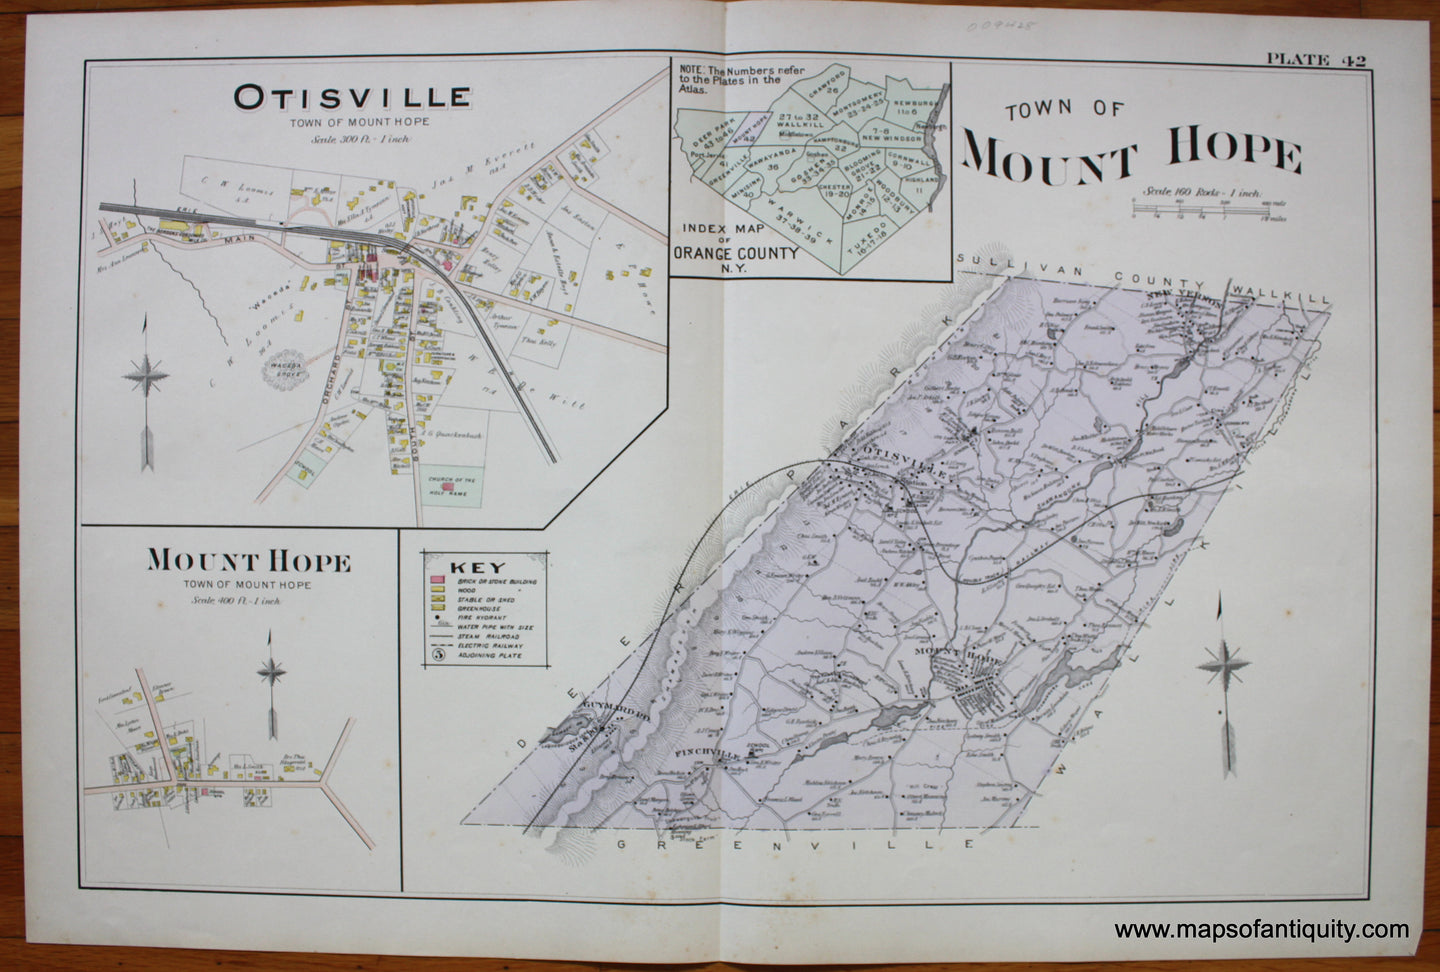 Antique-Printed-Color-Map-Town-of-Mount-Hope-NY-1903-Lathrop-/-A.-H.-Mueller-&-Co-New-York-1800s-19th-century-Maps-of-Antiquity